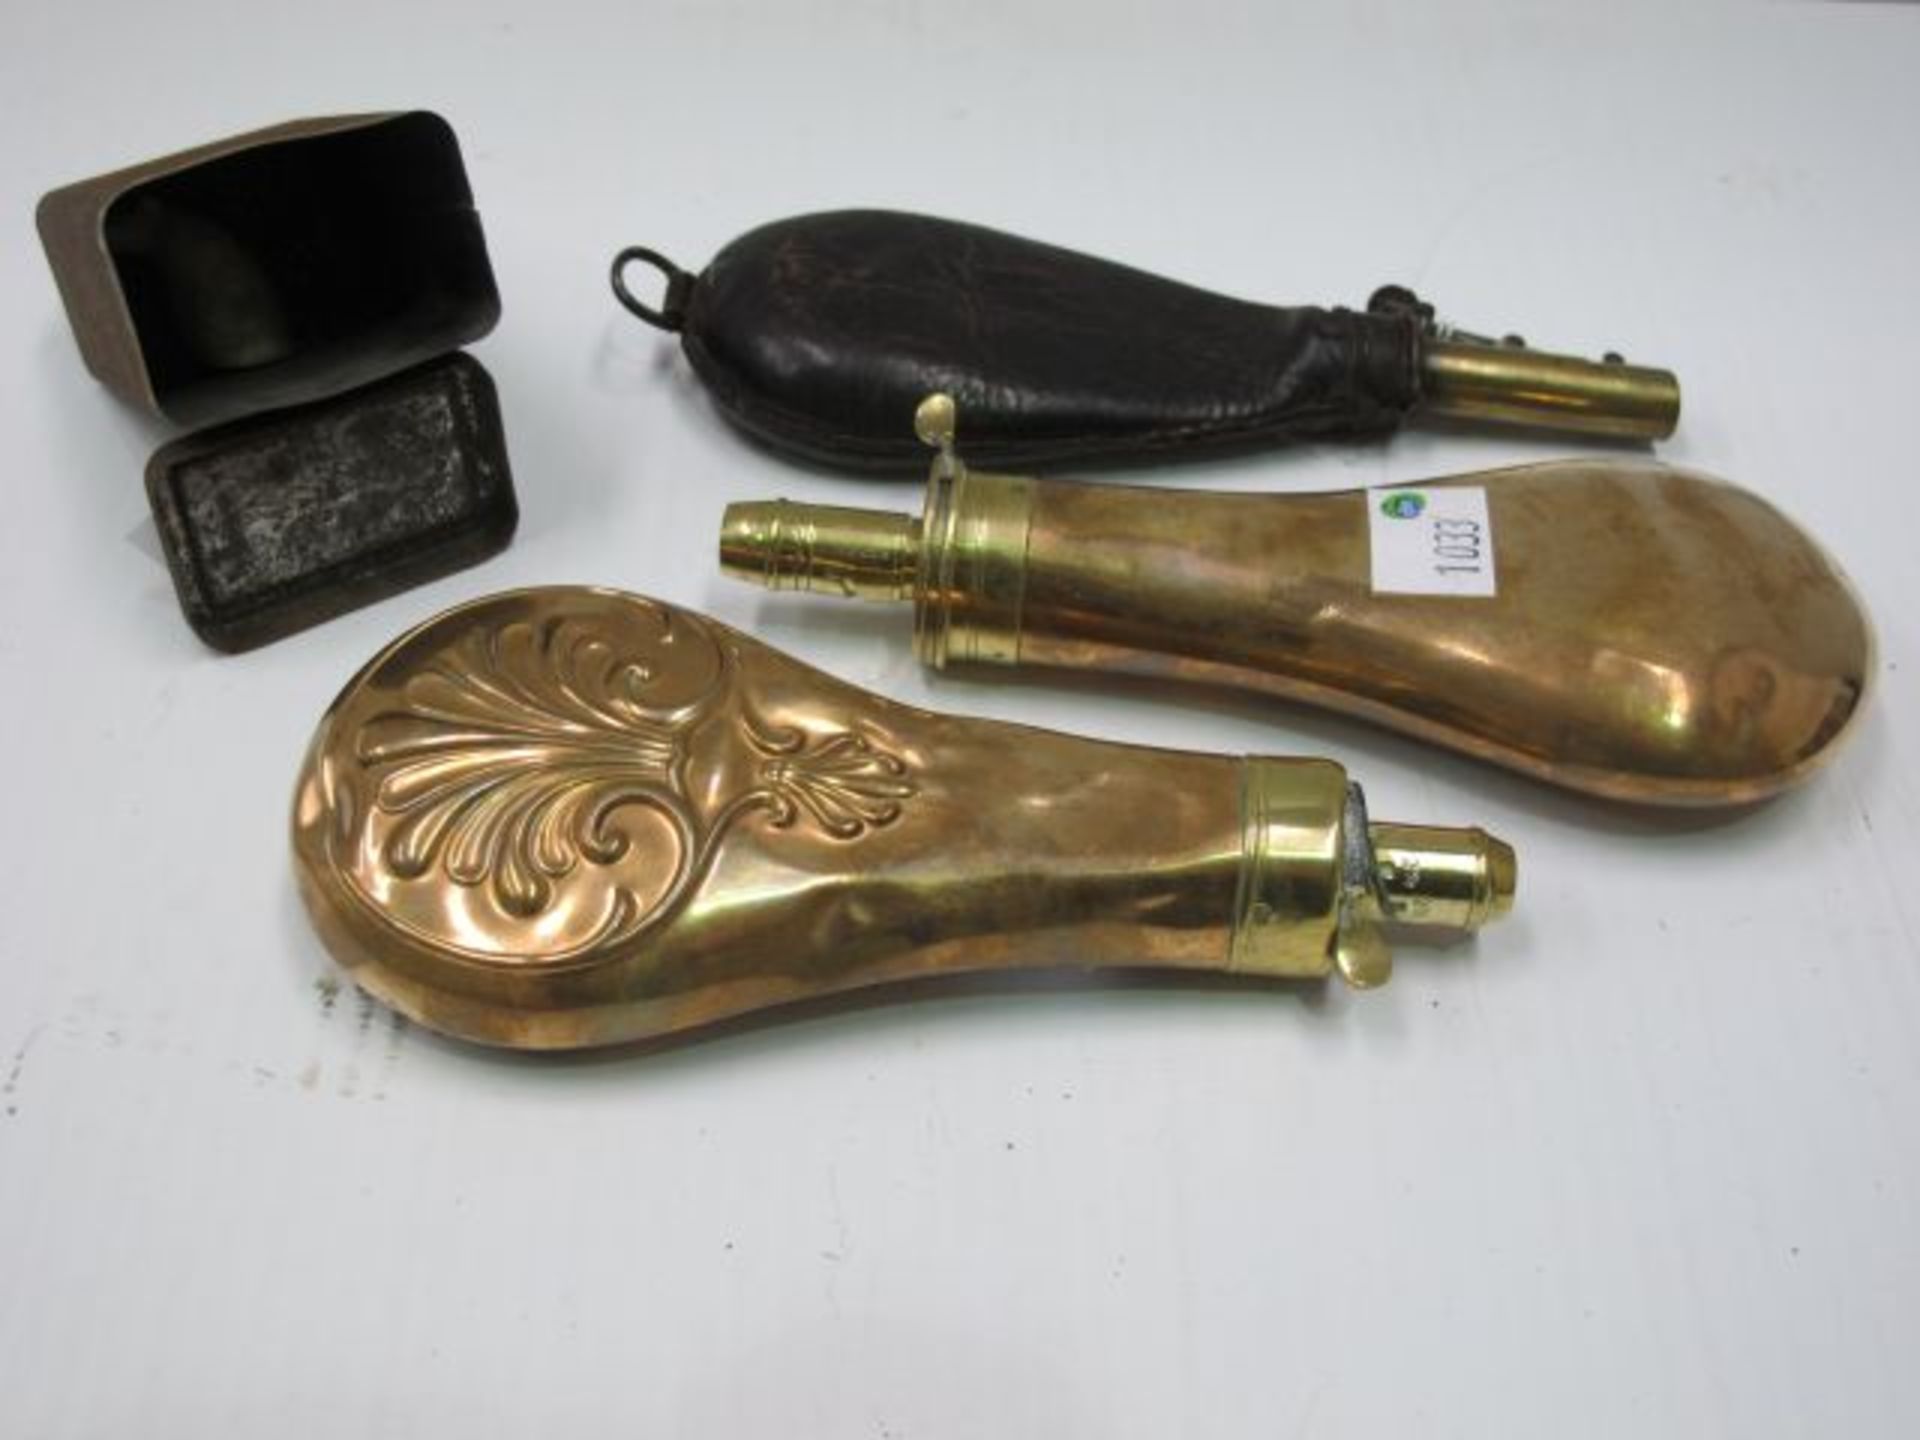 A Leather and Brass Shot dispenser (with Shot) together with a tin of Shot. A Brass and Copper